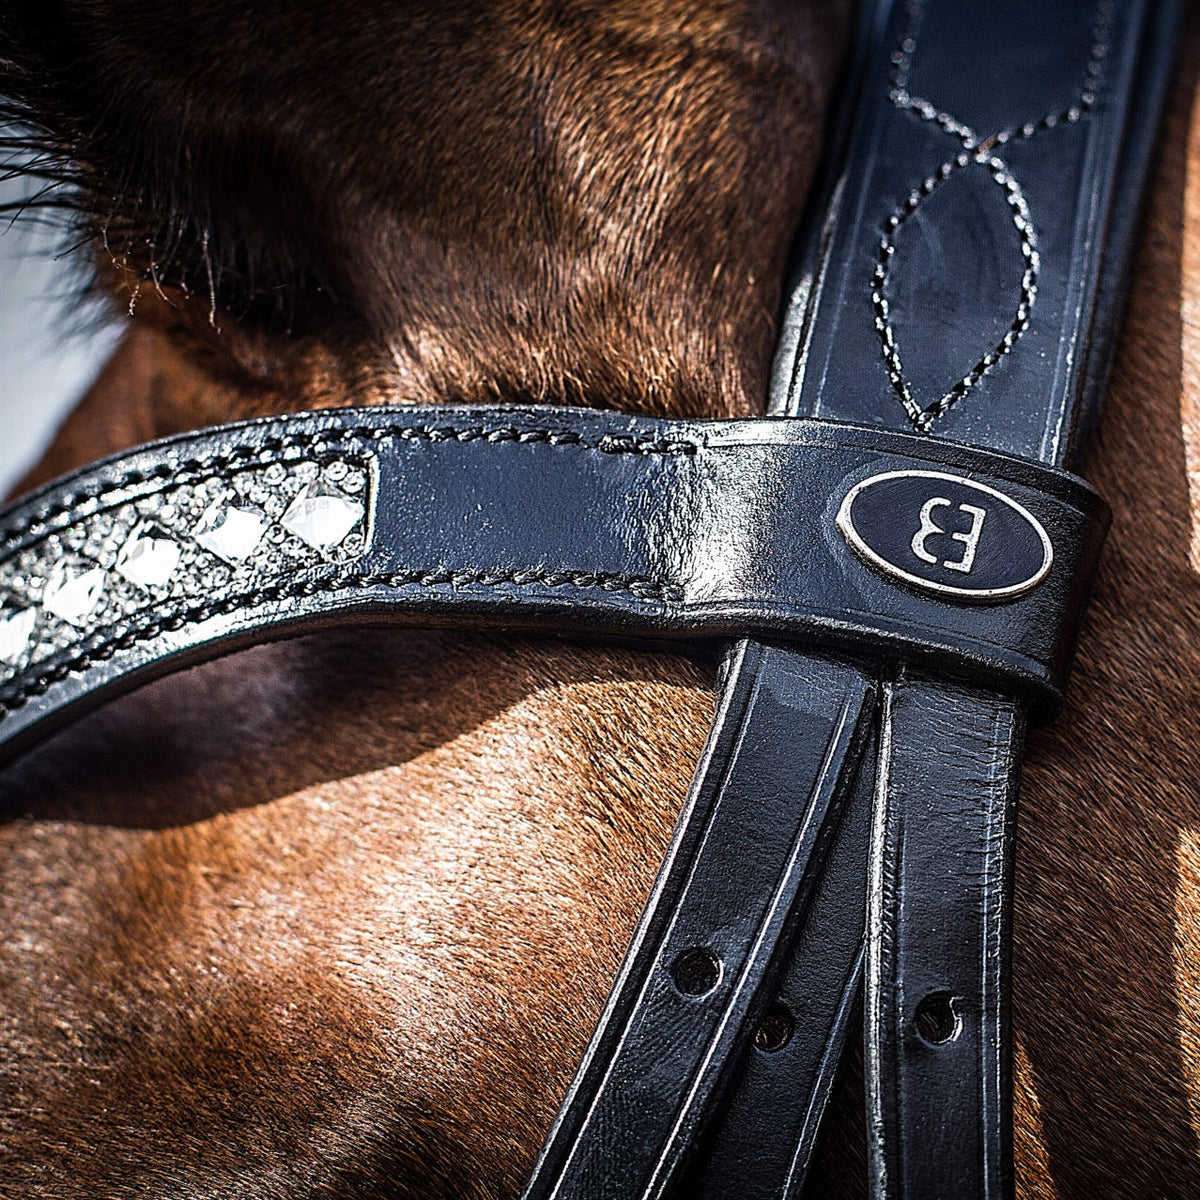 Close up of majesty bridle, showing small logo, stitching detail and diamantes.